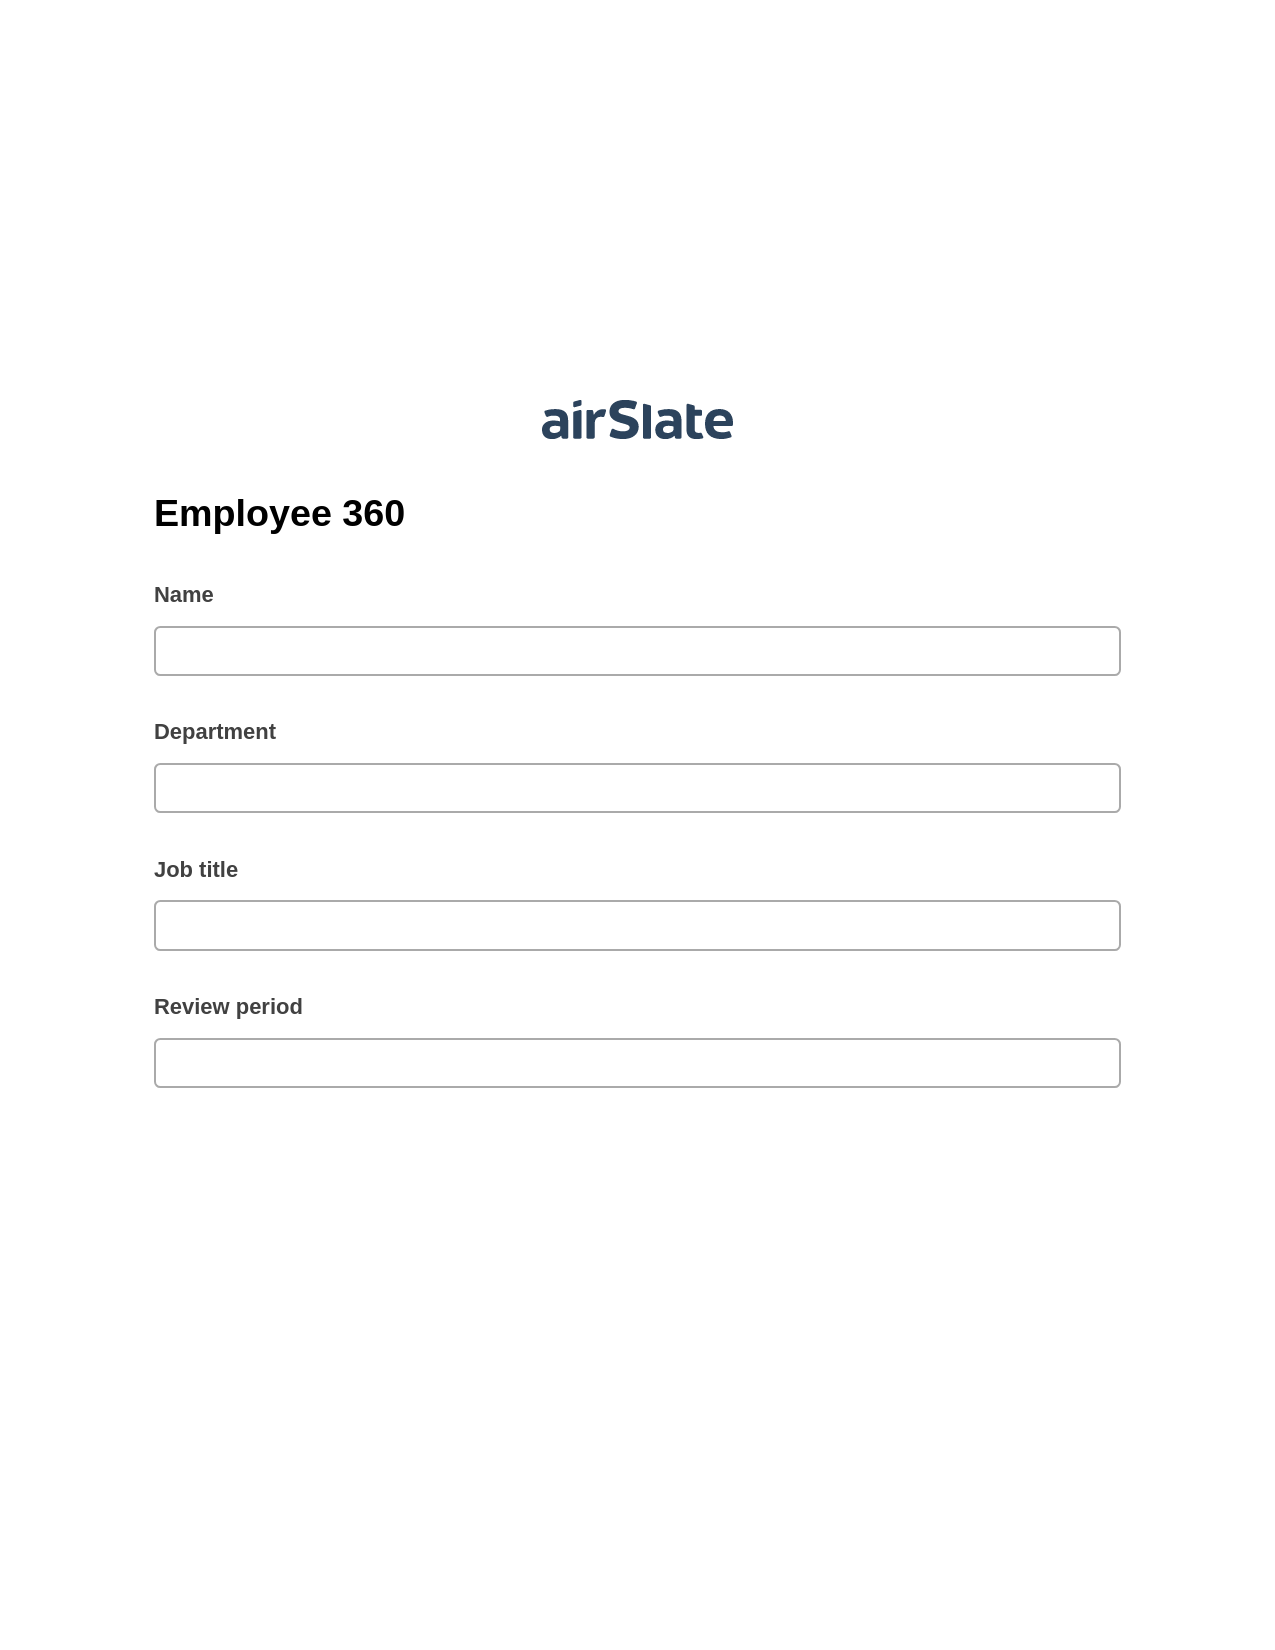 Multirole Employee 360 Pre-fill from another Slate Bot, Remove Slate Bot, Archive to SharePoint Folder Bot